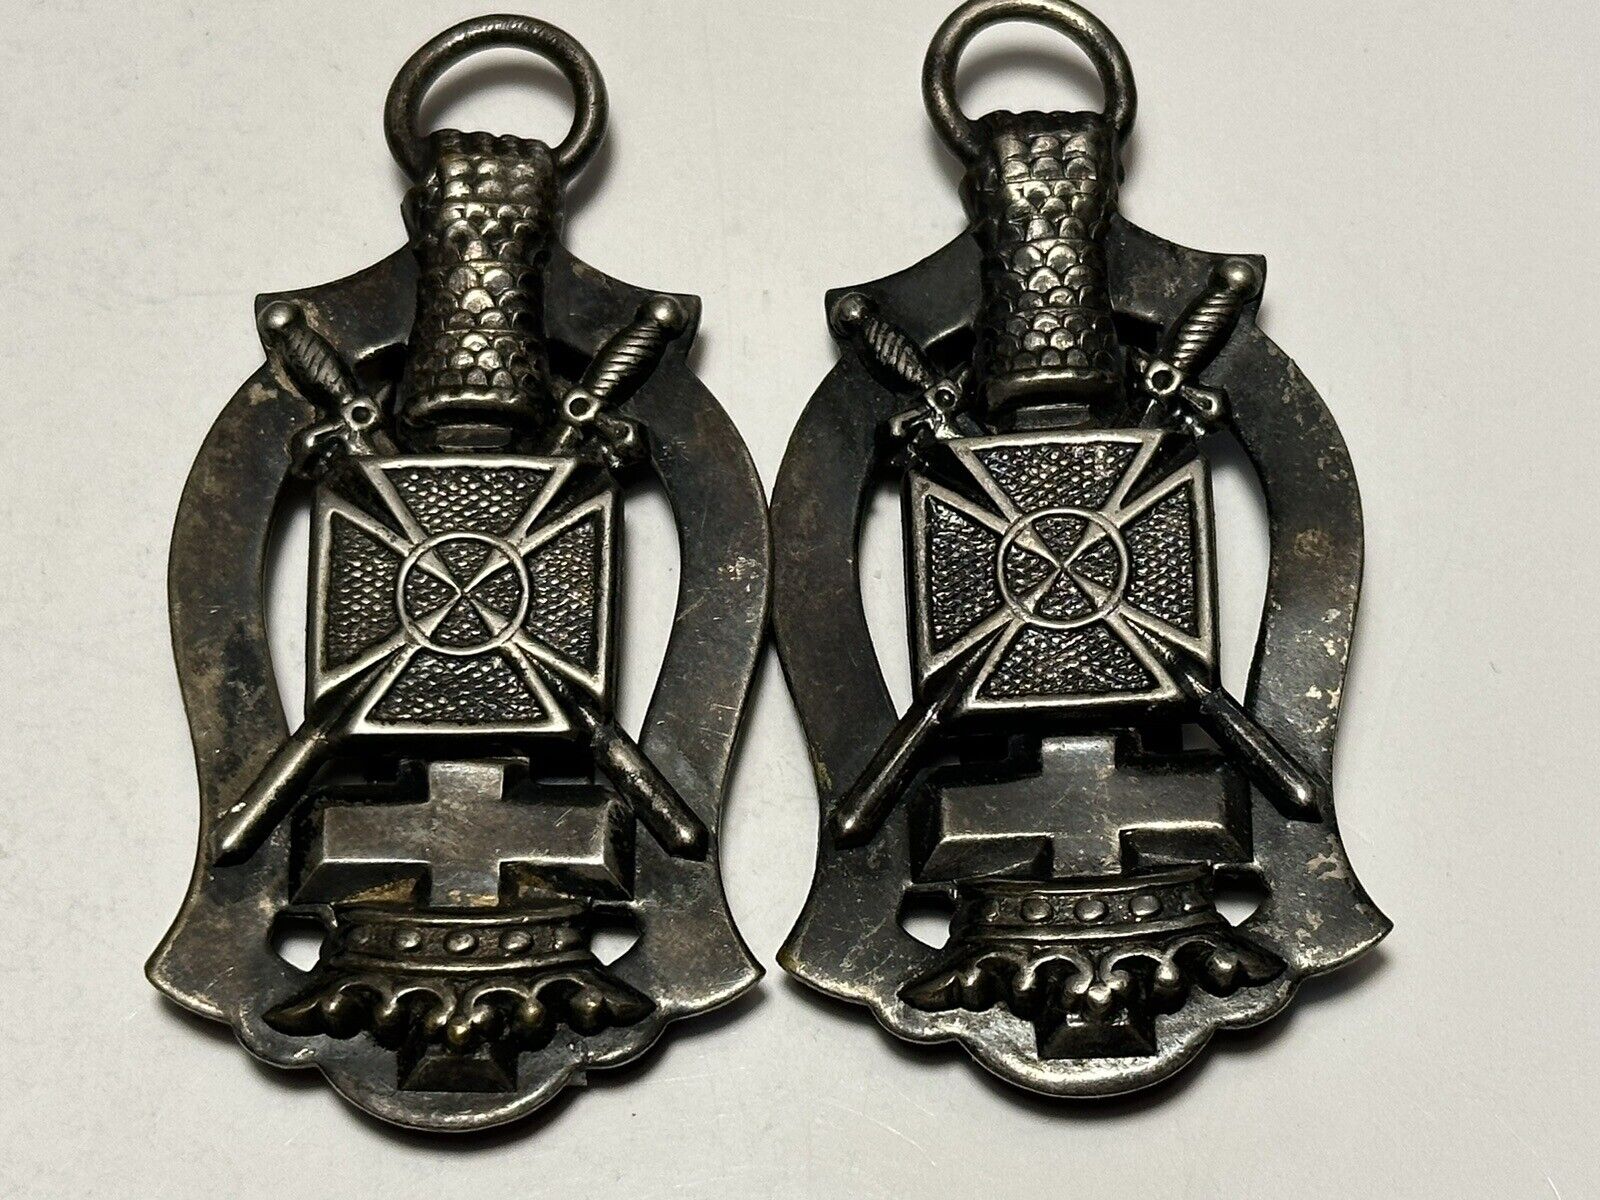 PAIR OF ANTIQUE MILITARY COAT OF ARMS UNIFORM BUCKLES